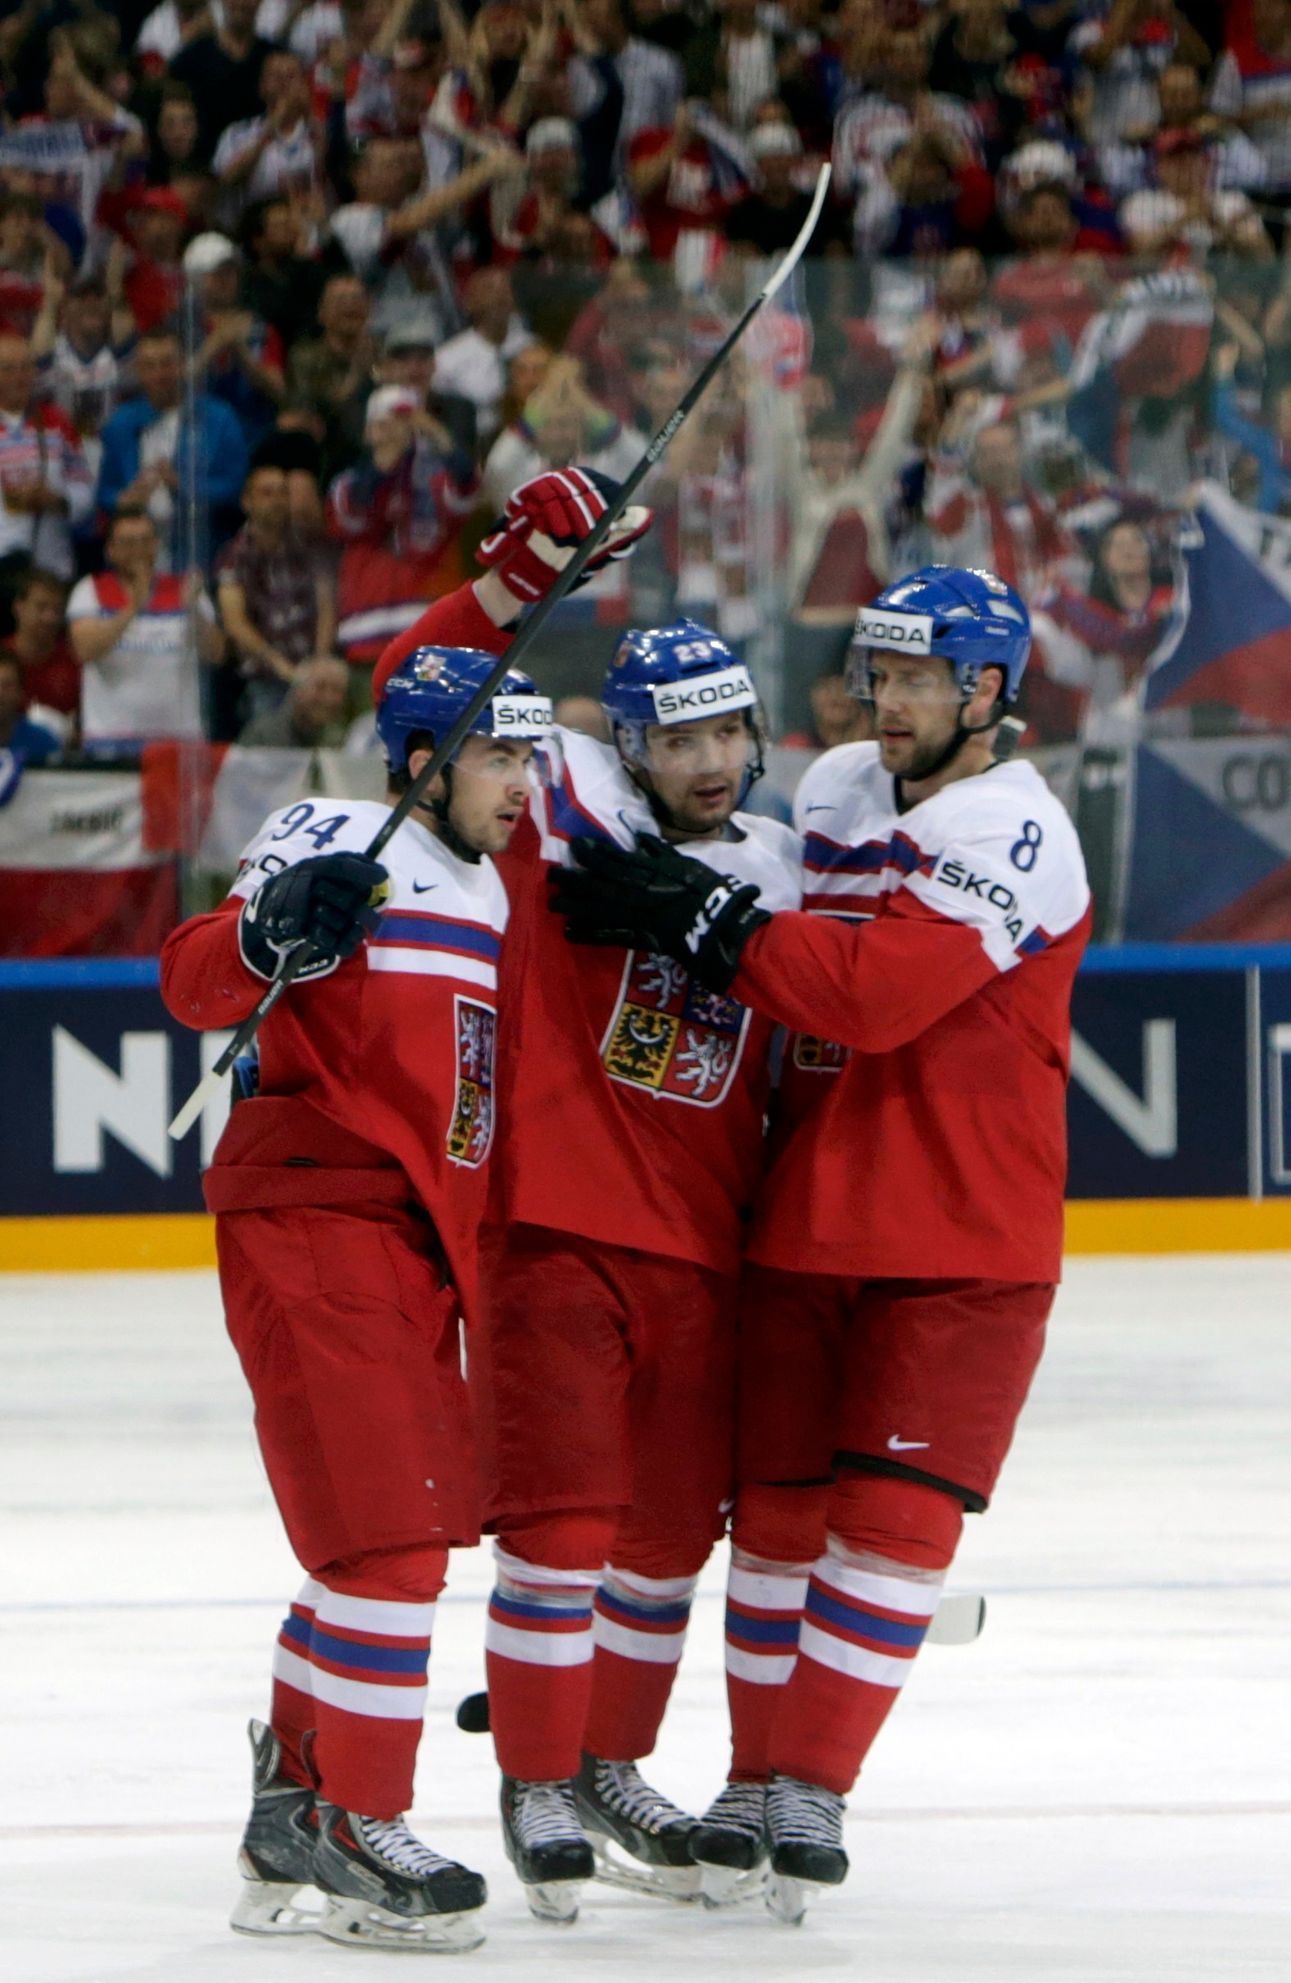 Nemec of the Czech Republic celebrates his goal against Austria with team mates Simon and Hejda during their Ice Hockey World Championship game at the O2 arena in Prague